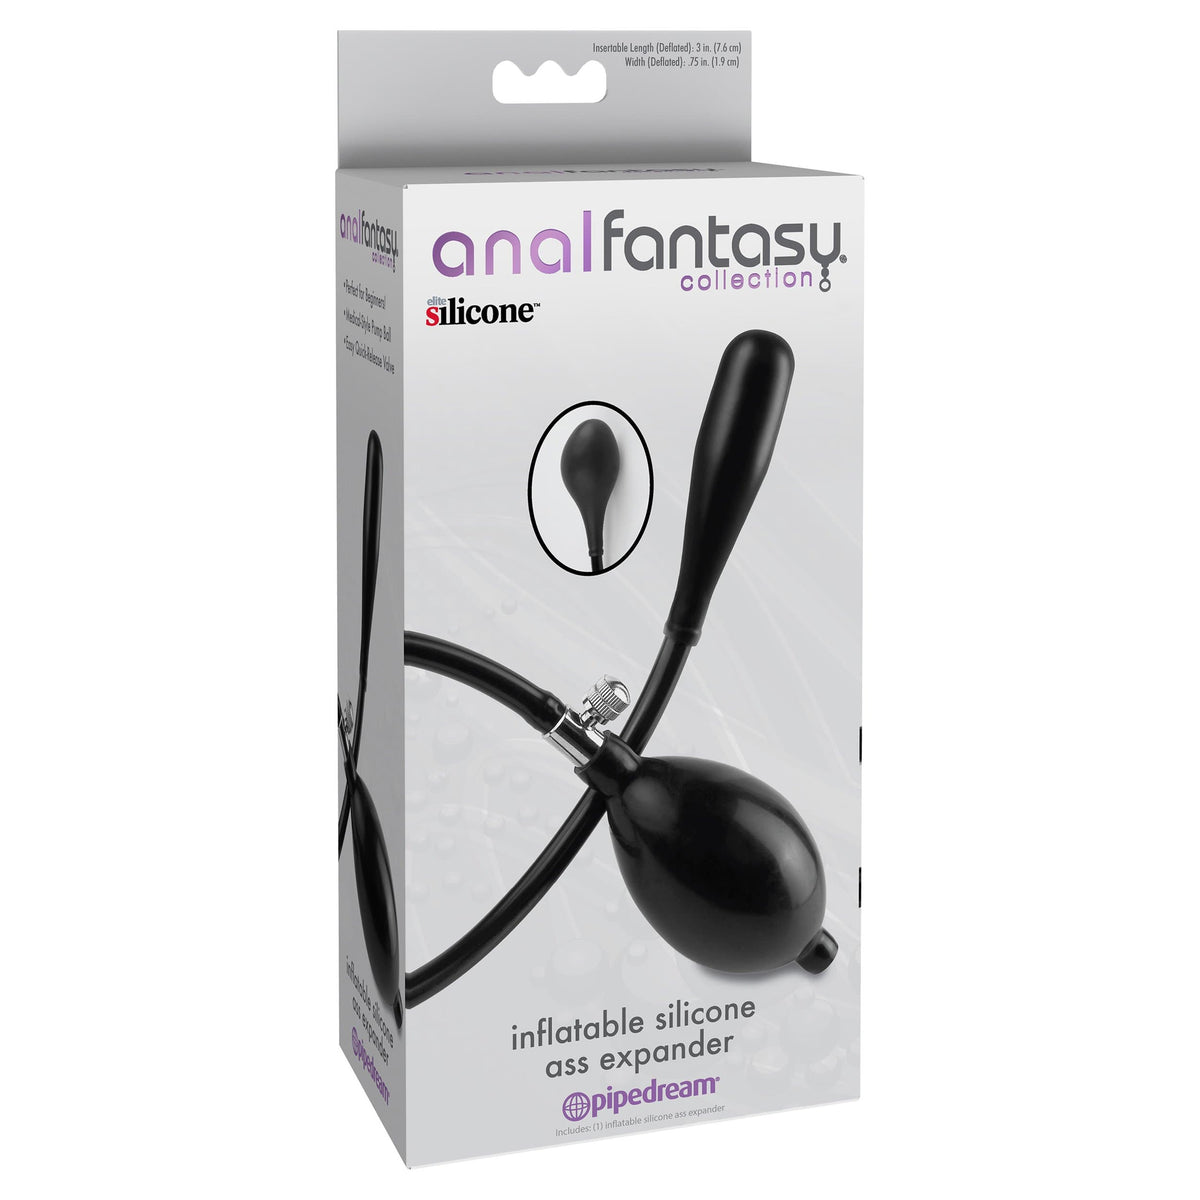 Pipedream - Anal Fantasy Collection Inflatable Silicone Ass Expander (Black)